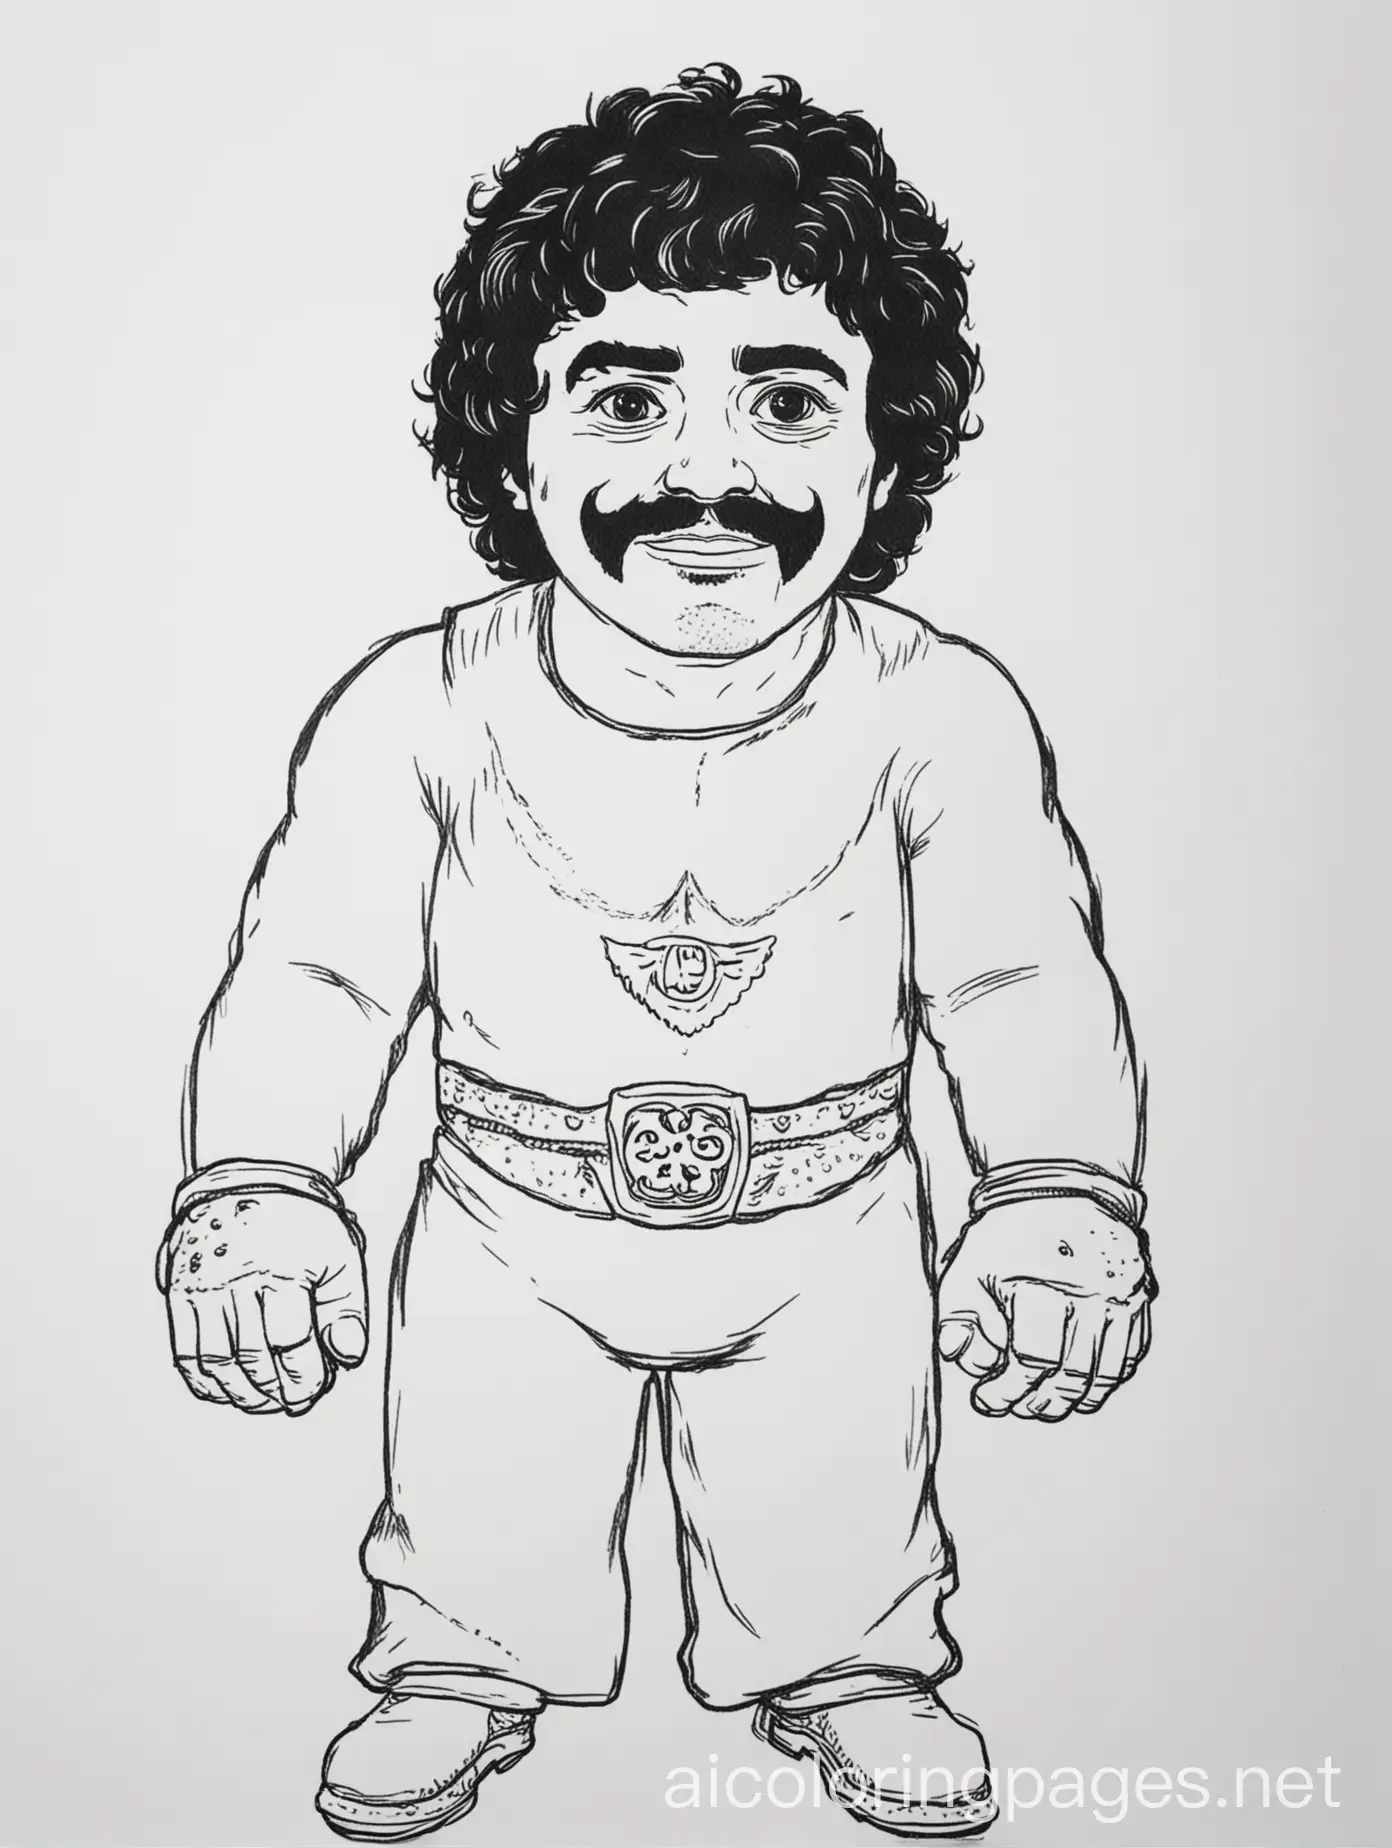 NACHO LIBRE, Coloring Page, black and white, line art, white background, Simplicity, Ample White Space. The background of the coloring page is plain white to make it easy for young children to color within the lines. The outlines of all the subjects are easy to distinguish, making it simple for kids to color without too much difficulty